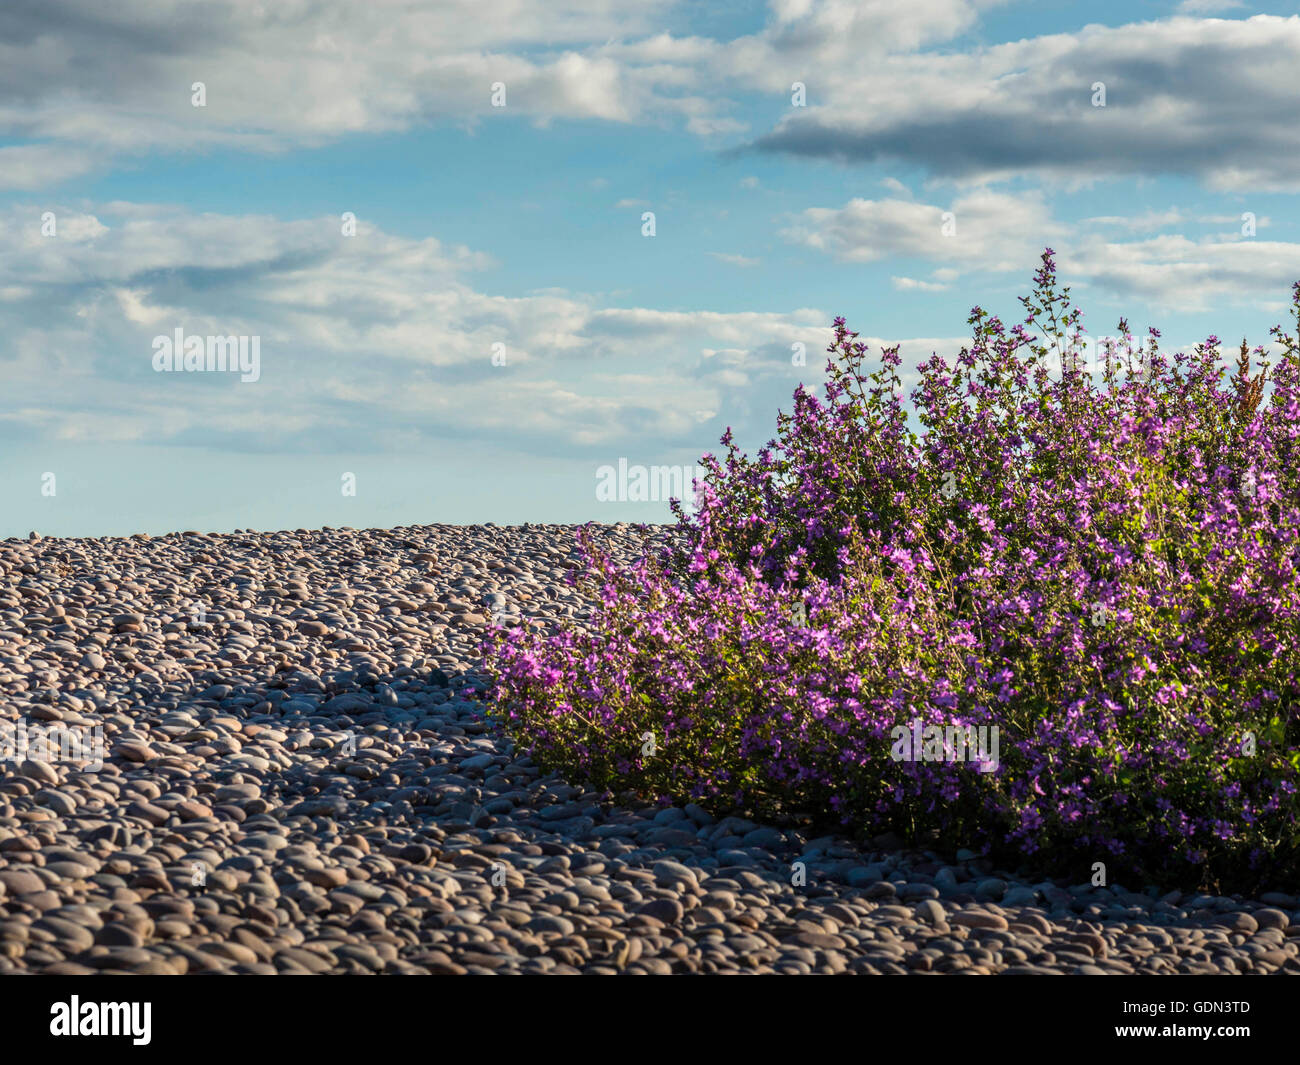 Summer seaside scene depicting pebble beach with mass of pink flowers with blue sky backdrop. Stock Photo